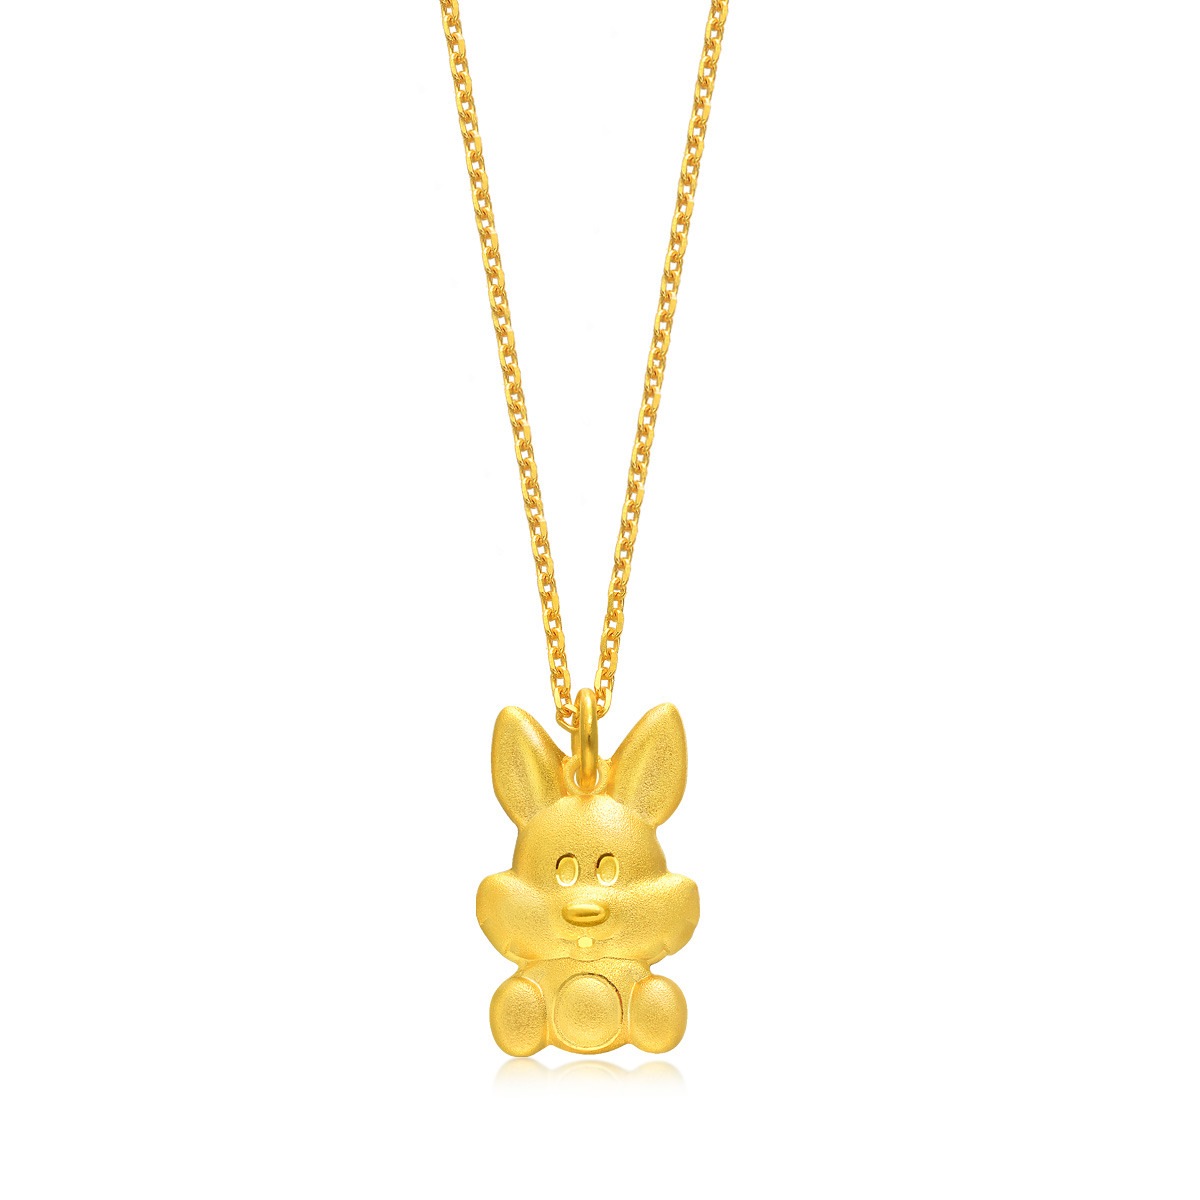 Chinese Gifting Collection 999.9 Gold Pendant - 86478P | Chow Sang Sang ...